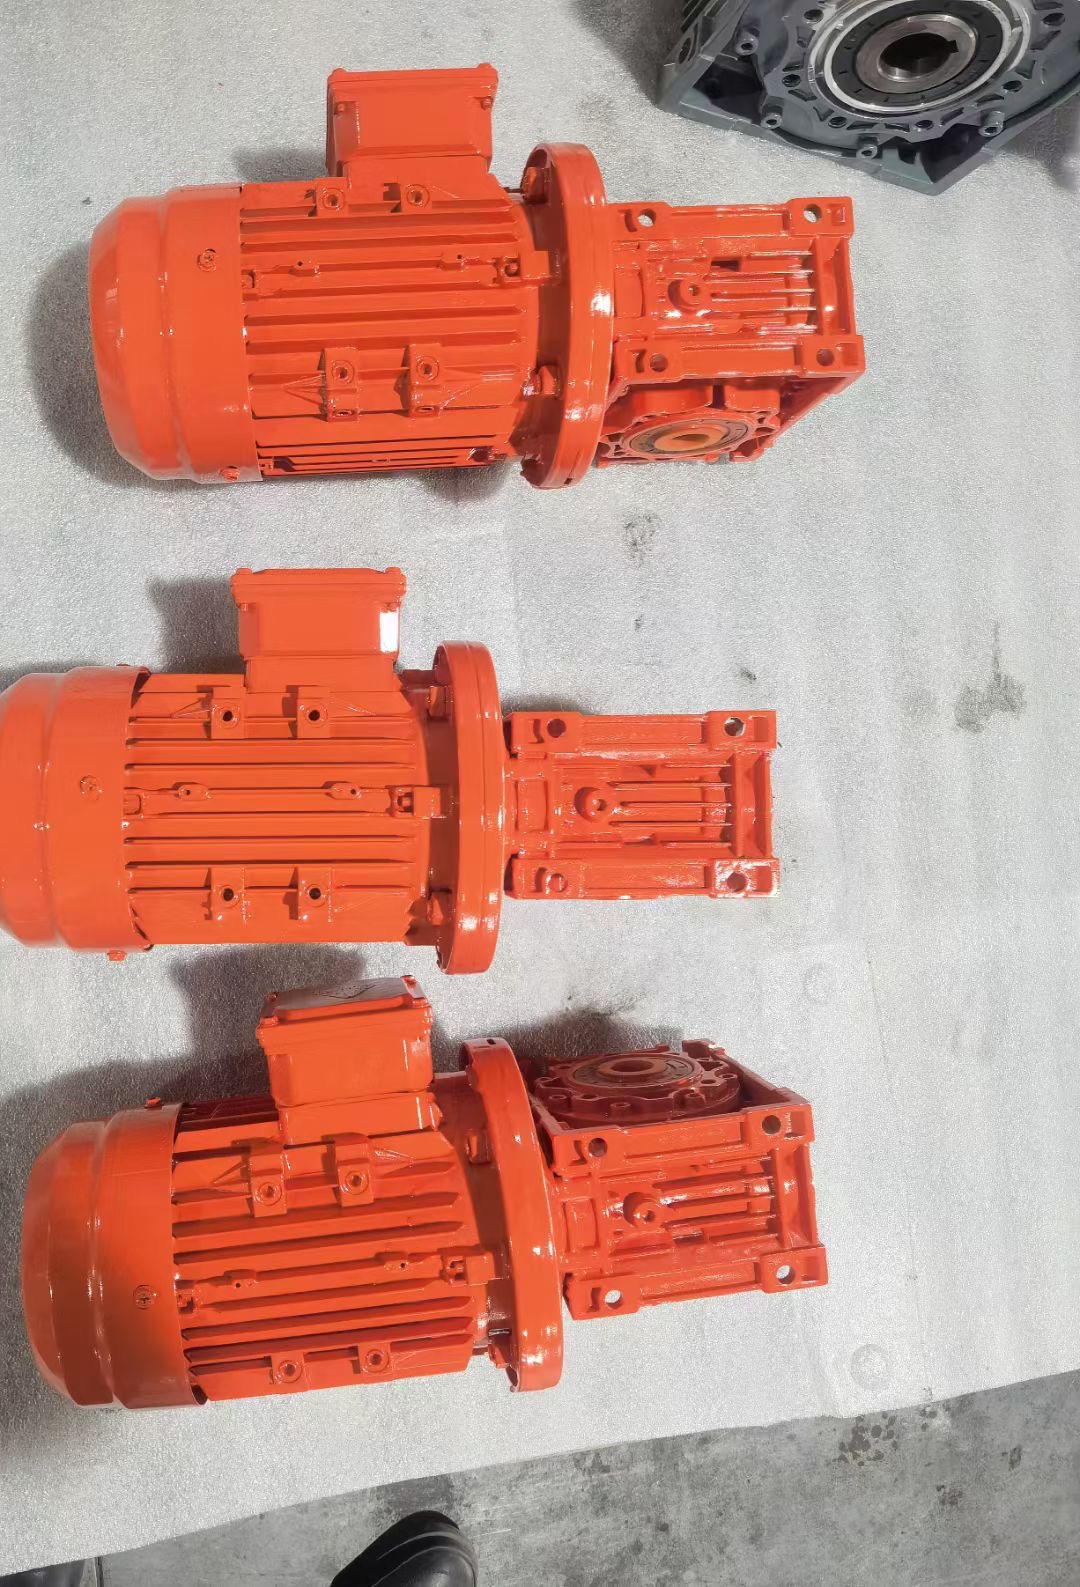 High torque wpa 45hp 3000 rpm gearbox speed reducer small engine gear box with 3 phase motor cheap price